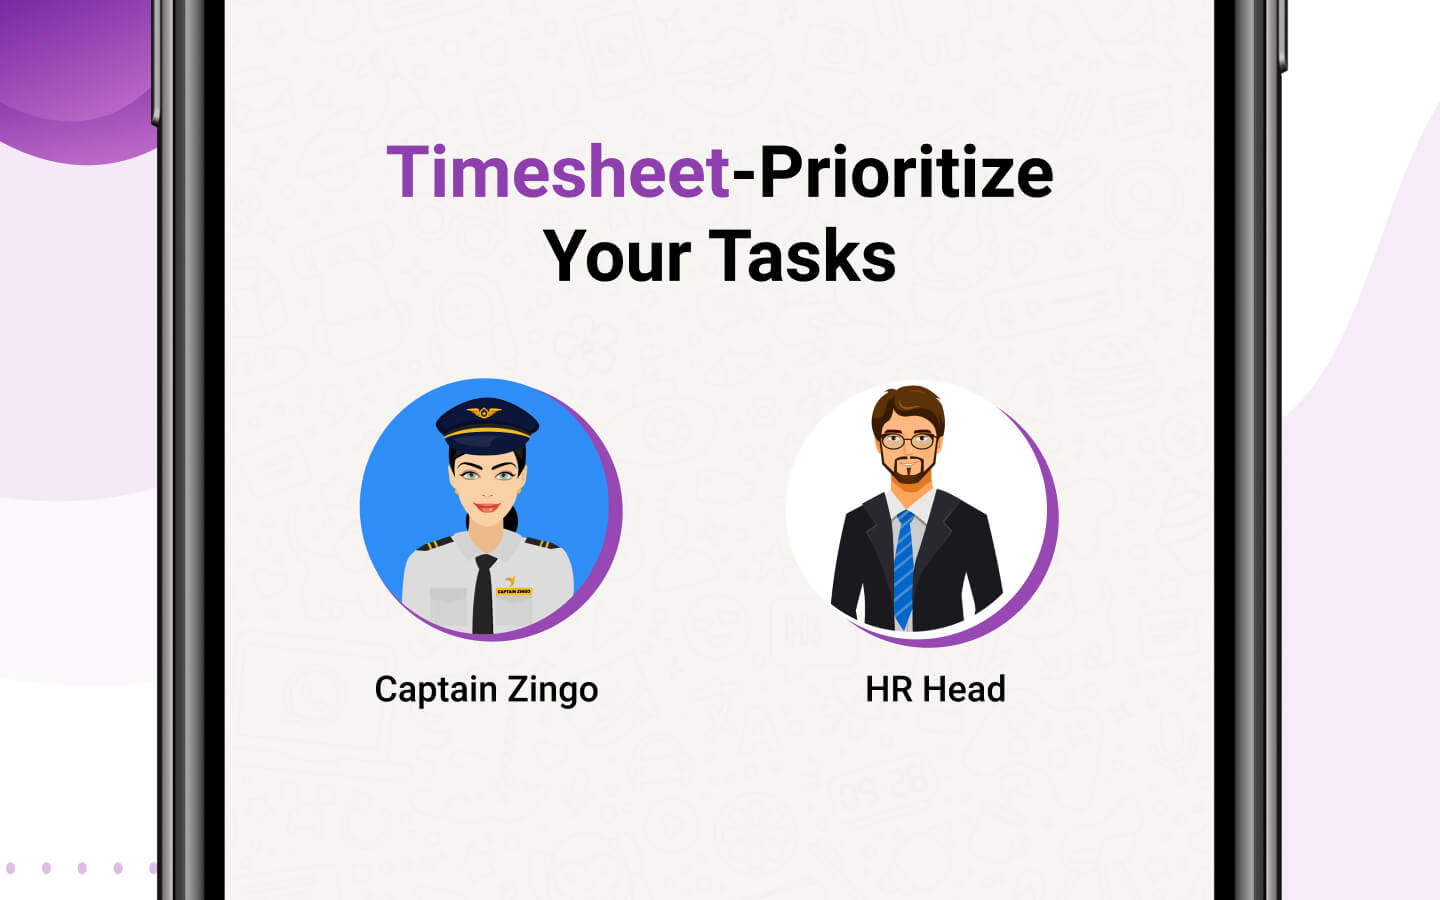 Timesheet-Prioritize Your Tasks